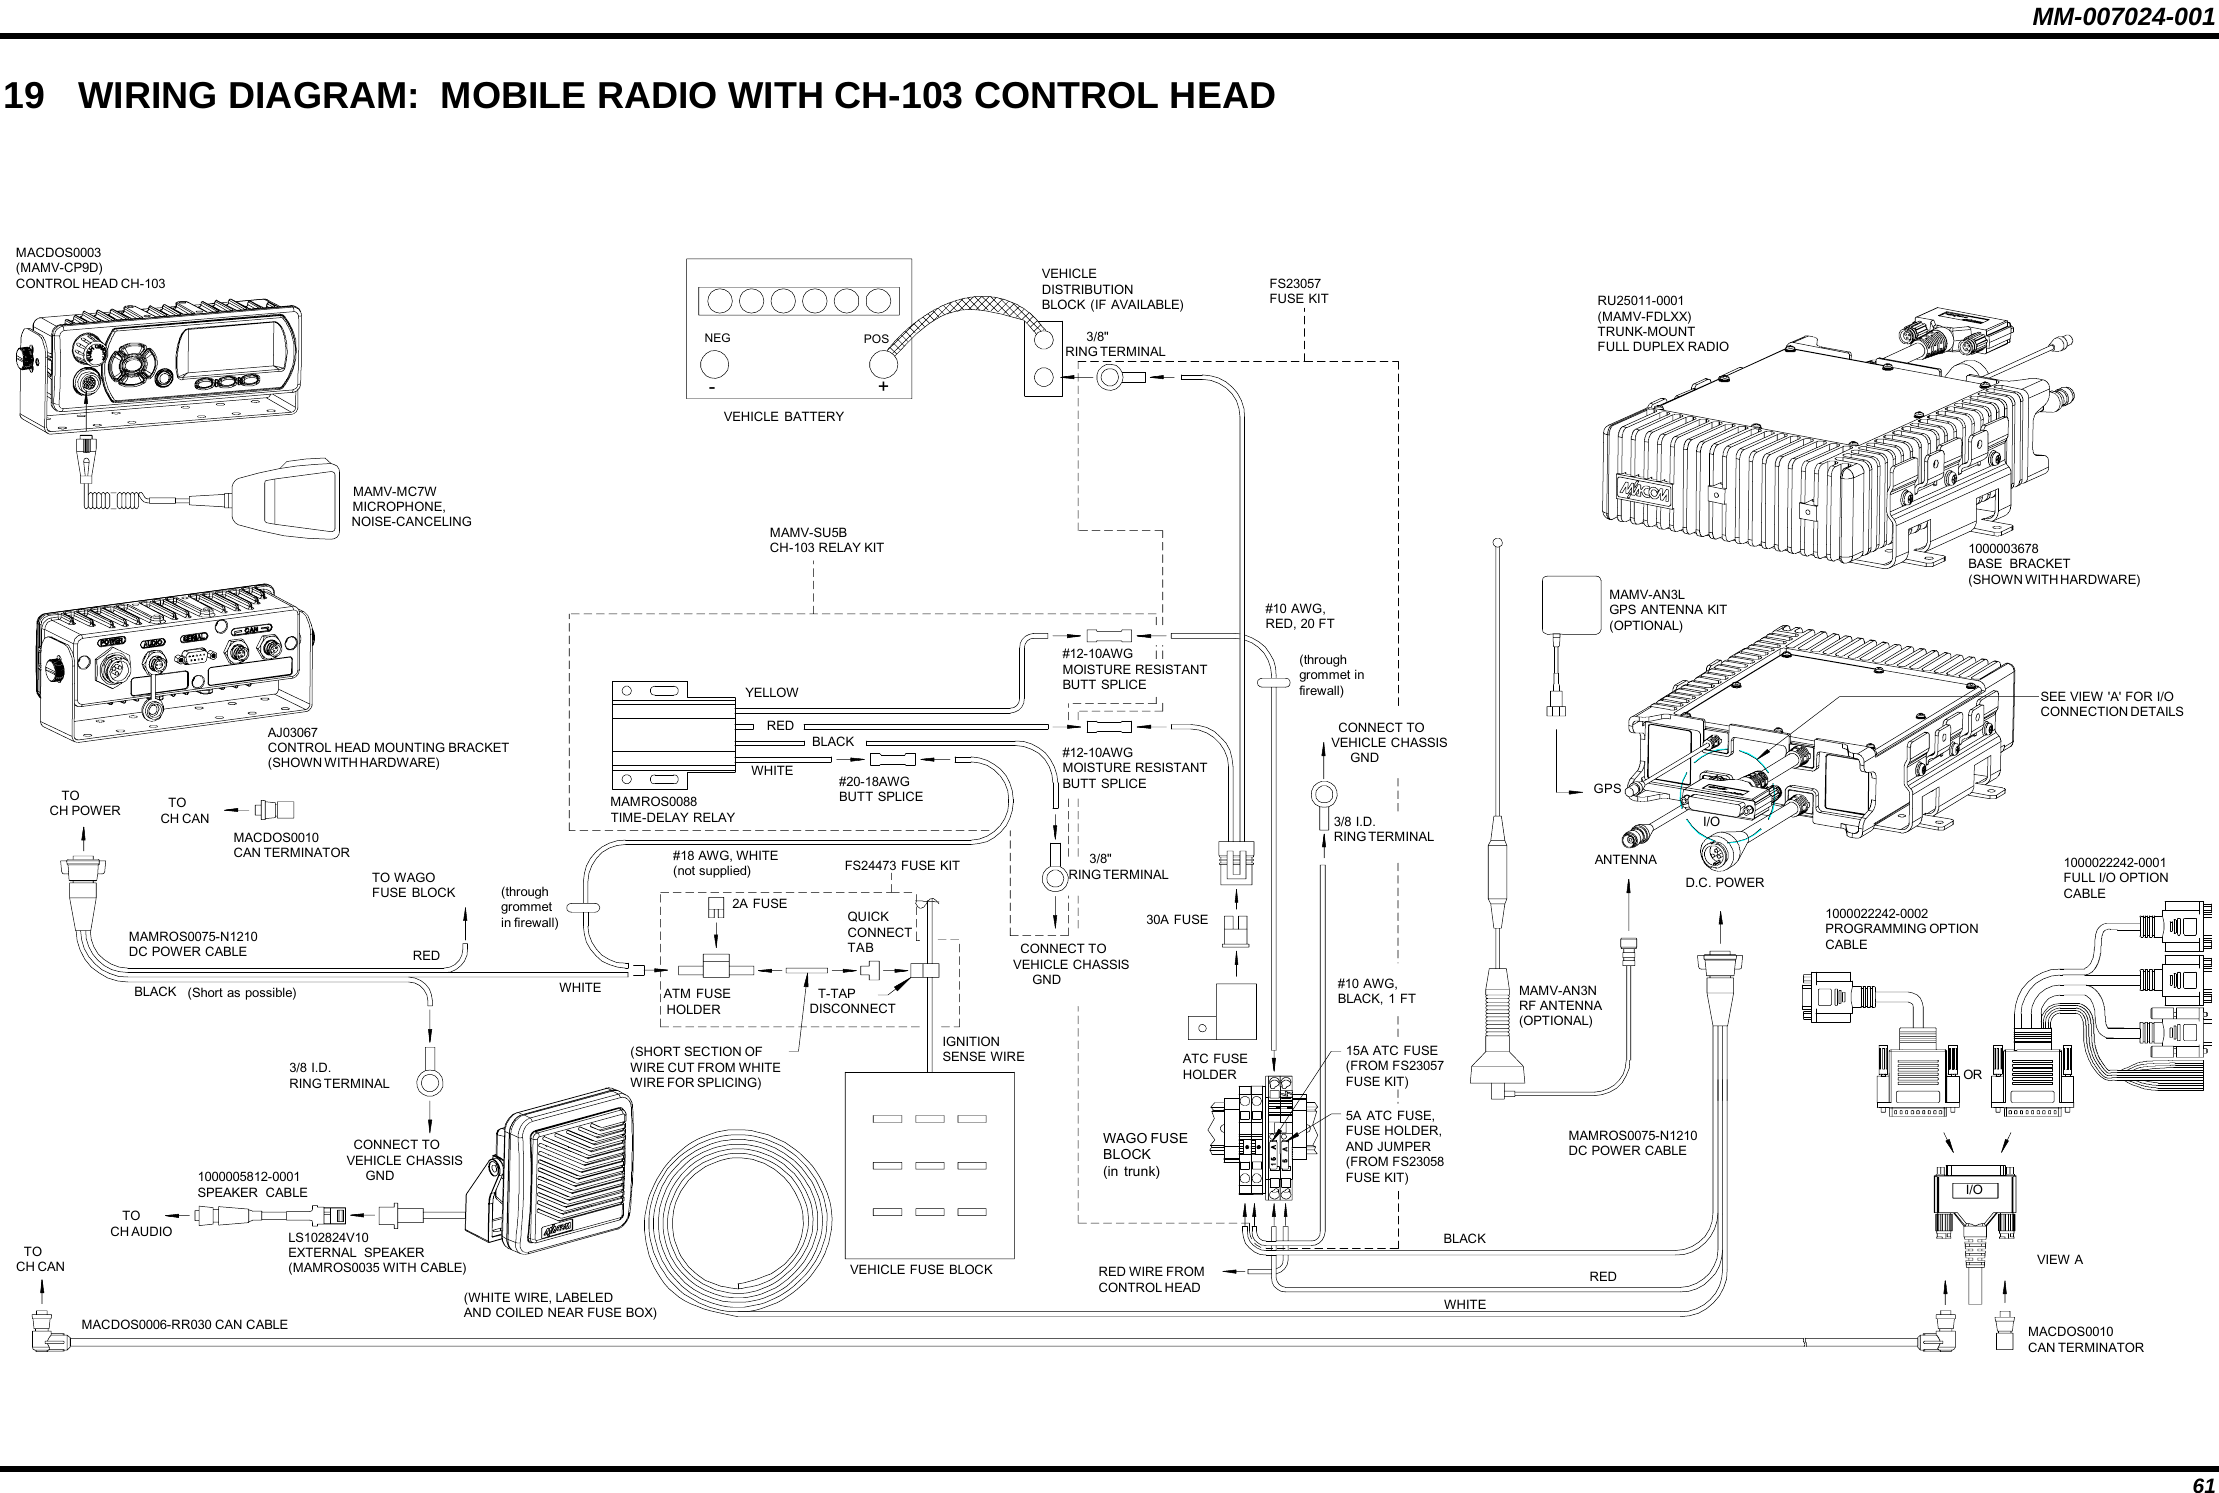 MM-007024-001 61 19  WIRING DIAGRAM:  MOBILE RADIO WITH CH-103 CONTROL HEAD FS24473  FUSE KITMAMV-SU5BCH-103 RELAY KITI/O#12-10AWGMOISTURE RESISTANTBUTT SPLICE5A  ATC FUSE,FUSE HOLDER,AND JUMPER(FROM FS23058FUSE KIT)15A ATC FUSE(FROM FS23057FUSE KIT)MACDOS0010CAN TERMINATOROR#12-10AWGMOISTURE RESISTANTBUTT SPLICE     3/8&quot;RING TERMINAL  CONNECT TOVEHICLE CHASSIS     GND#10 AWG,BLACK,  1  FT3/8 I.D.RING TERMINALWAGO FUSEBLOCK(in trunk)  T-TAPDISCONNECT(throughgrommetin firewall)(throughgrommet infirewall)VEHICLEDISTRIBUTIONBLOCK  (IF AVAILABLE)     3/8&quot;RING TERMINALATC FUSEHOLDER30A  FUSE1000003678BASE  BRACKET(SHOWN WITH HARDWARE)#10 AWG,RED, 20 FTANTENNAMAMV-AN3NRF ANTENNA(OPTIONAL)MAMV-AN3LGPS ANTENNA KIT(OPTIONAL)(Short  as possible)MAMROS0075-N1210DC POWER CABLED.C. POWERPOSNEG-+VEHICLE  BATTERYWHITE   TOCH AUDIO  TOCH CAN  TOCH CANAJ03067CONTROL HEAD MOUNTING BRACKET(SHOWN WITH HARDWARE)(SHORT SECTION OFWIRE CUT FROM WHITEWIRE FOR SPLICING)FS23057FUSE KITWHITEREDBLACK(WHITE WIRE, LABELEDAND COILED NEAR FUSE BOX)IGNITIONSENSE WIRE1000005812-0001SPEAKER  CABLEMACDOS0006-RR030 CAN CABLEMACDOS0010CAN TERMINATOR  MAMV-MC7W  MICROPHONE,  NOISE-CANCELINGLS102824V10EXTERNAL  SPEAKER(MAMROS0035 WITH CABLE)   TOCH POWERMAMROS0075-N1210DC POWER CABLEMACDOS0003(MAMV-CP9D)CONTROL HEAD CH-103  CONNECT TOVEHICLE CHASSIS     GND3/8 I.D.RING TERMINALBLACKQUICKCONNECTTABATM  FUSE HOLDER2A  FUSEVEHICLE FUSE BLOCKREDRU25011-0001(MAMV-FDLXX)TRUNK-MOUNTFULL DUPLEX RADIO  MAMROS0088  TIME-DELAY RELAY#20-18AWGBUTT SPLICEYELLOWBLACKWHITERED  CONNECT TOVEHICLE CHASSIS     GND#18 AWG, WHITE(not supplied)TO WAGOFUSE BLOCKRED WIRE FROMCONTROL HEADSEE VIEW &apos;A&apos; FOR I/OCONNECTION DETAILSVIEW AGPSI/O1000022242-0001FULL I/O OPTIONCABLE1000022242-0002PROGRAMMING OPTIONCABLE 